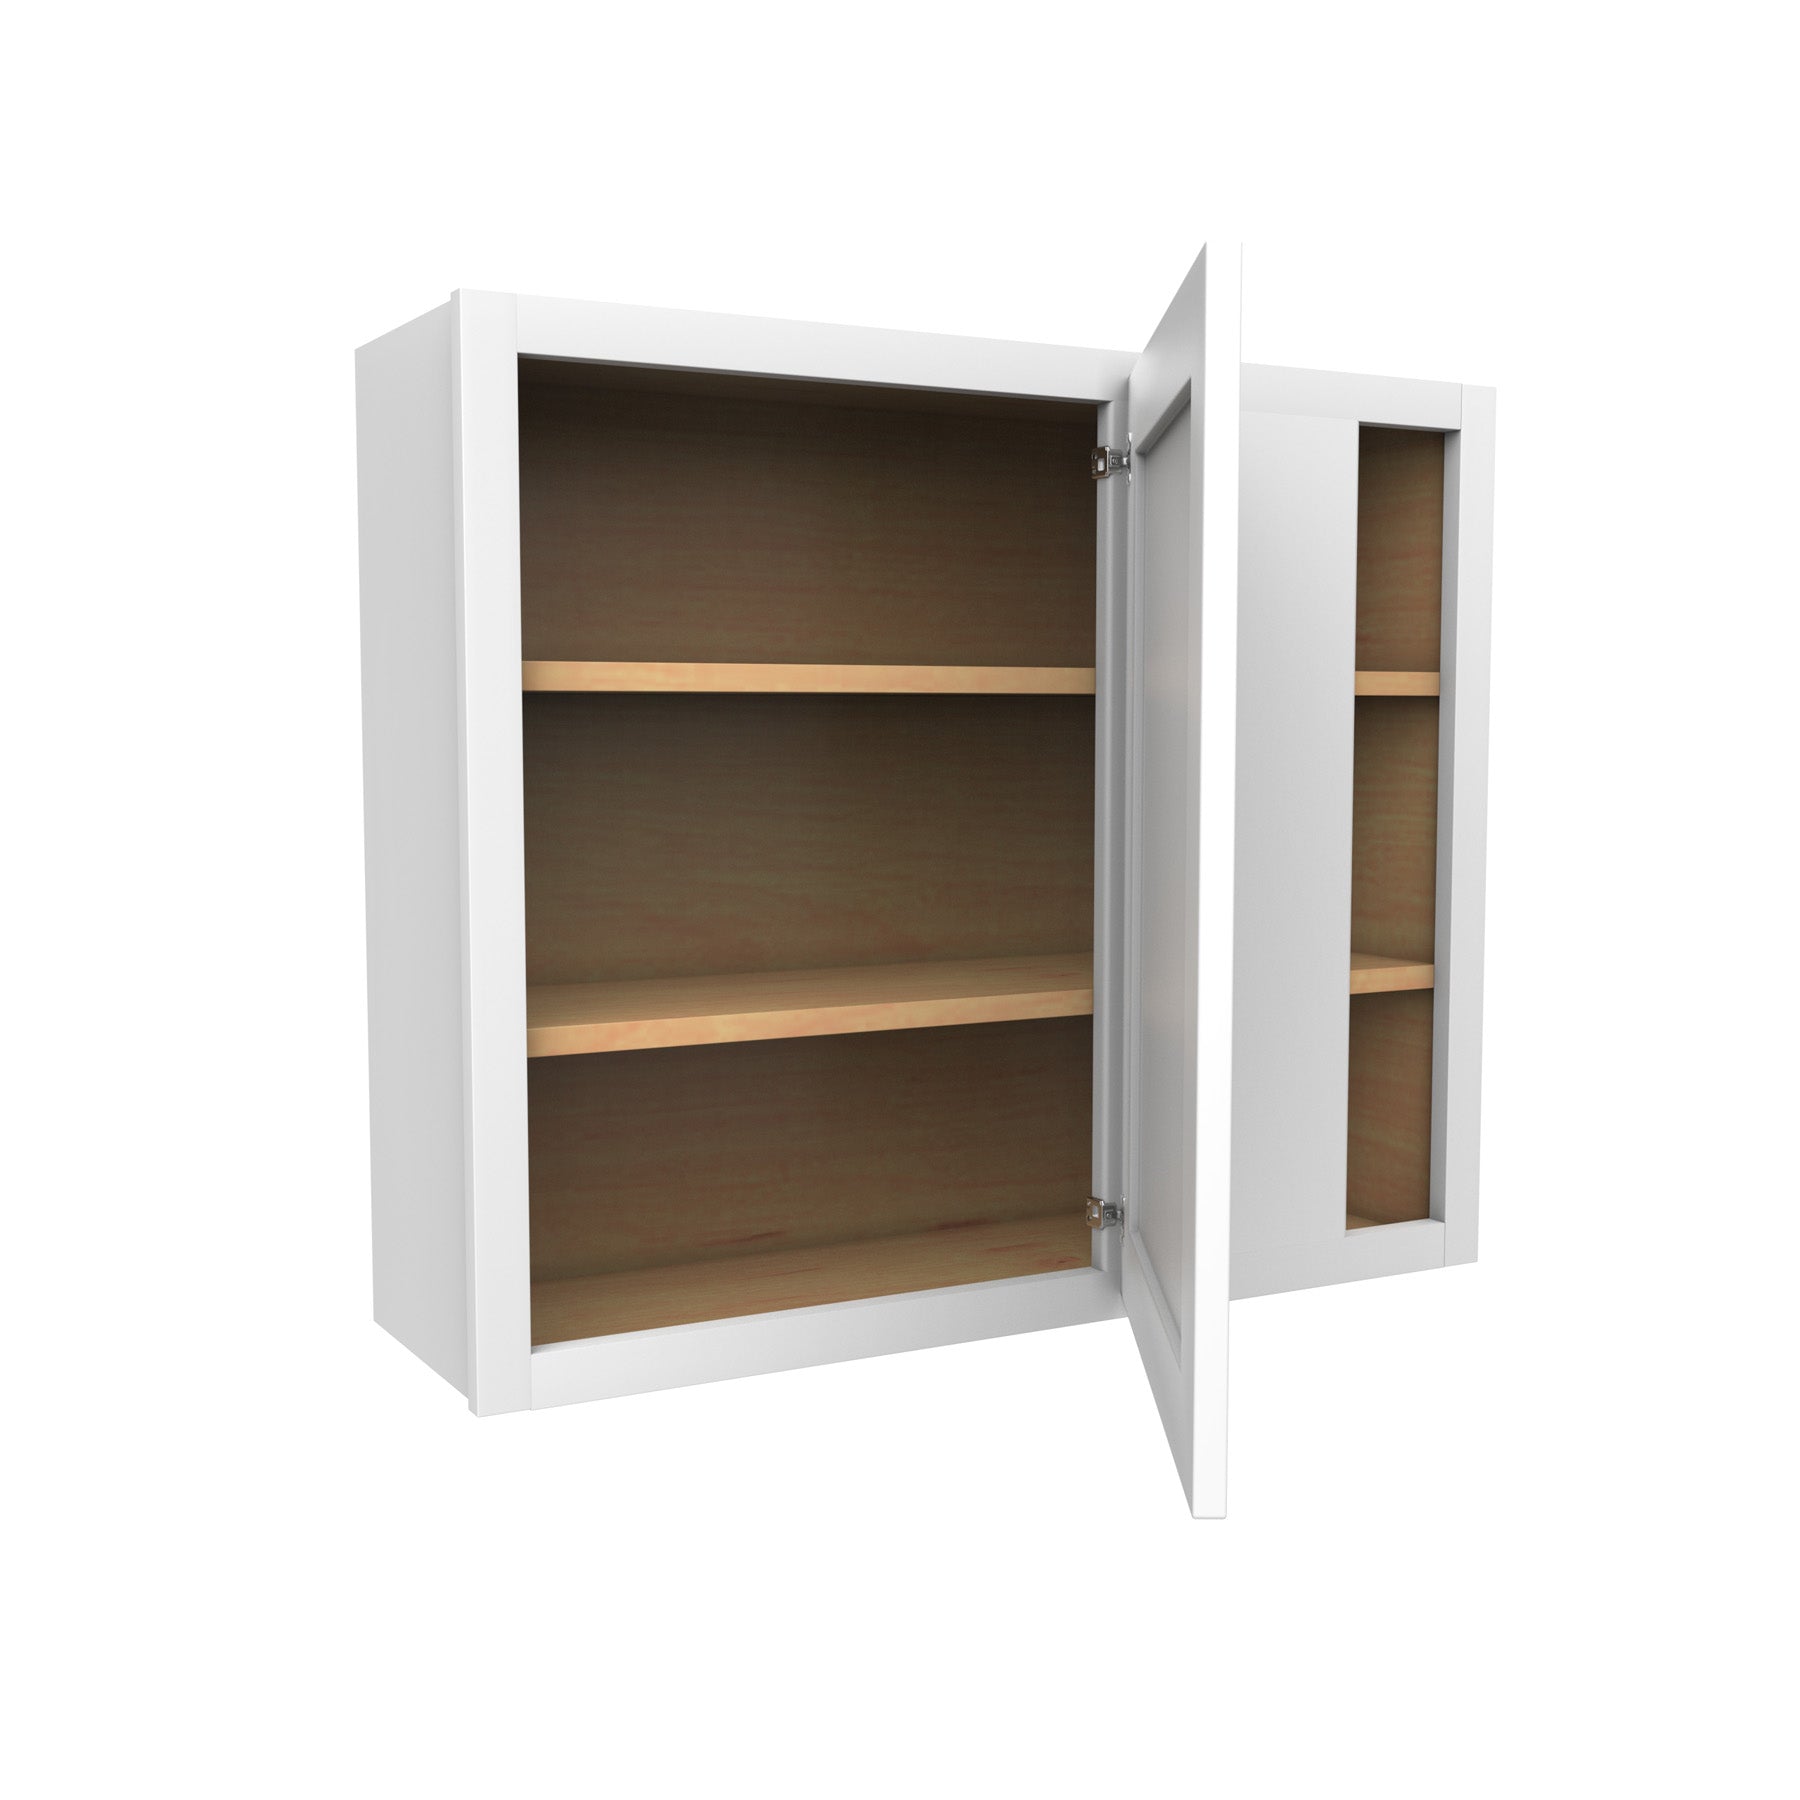 Luxor White - Blind Wall Cabinet | 36"W x 30"H x 12"D